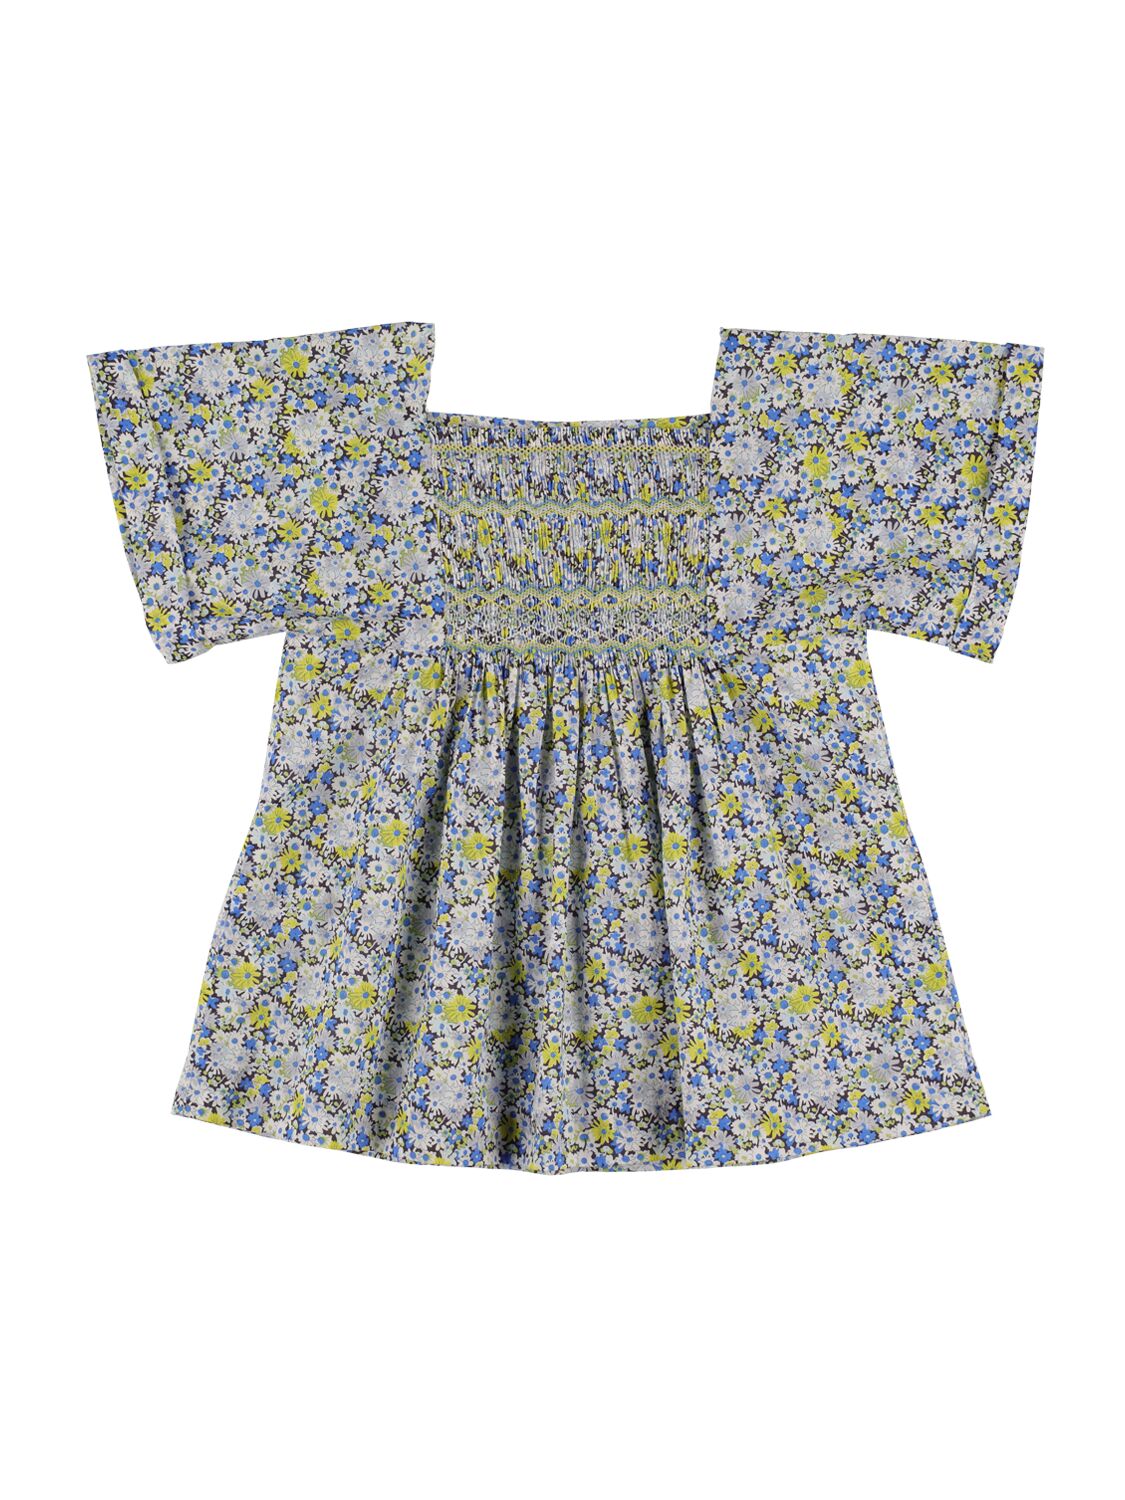 Bonpoint Kids' Printed Cotton Shirt In Blue